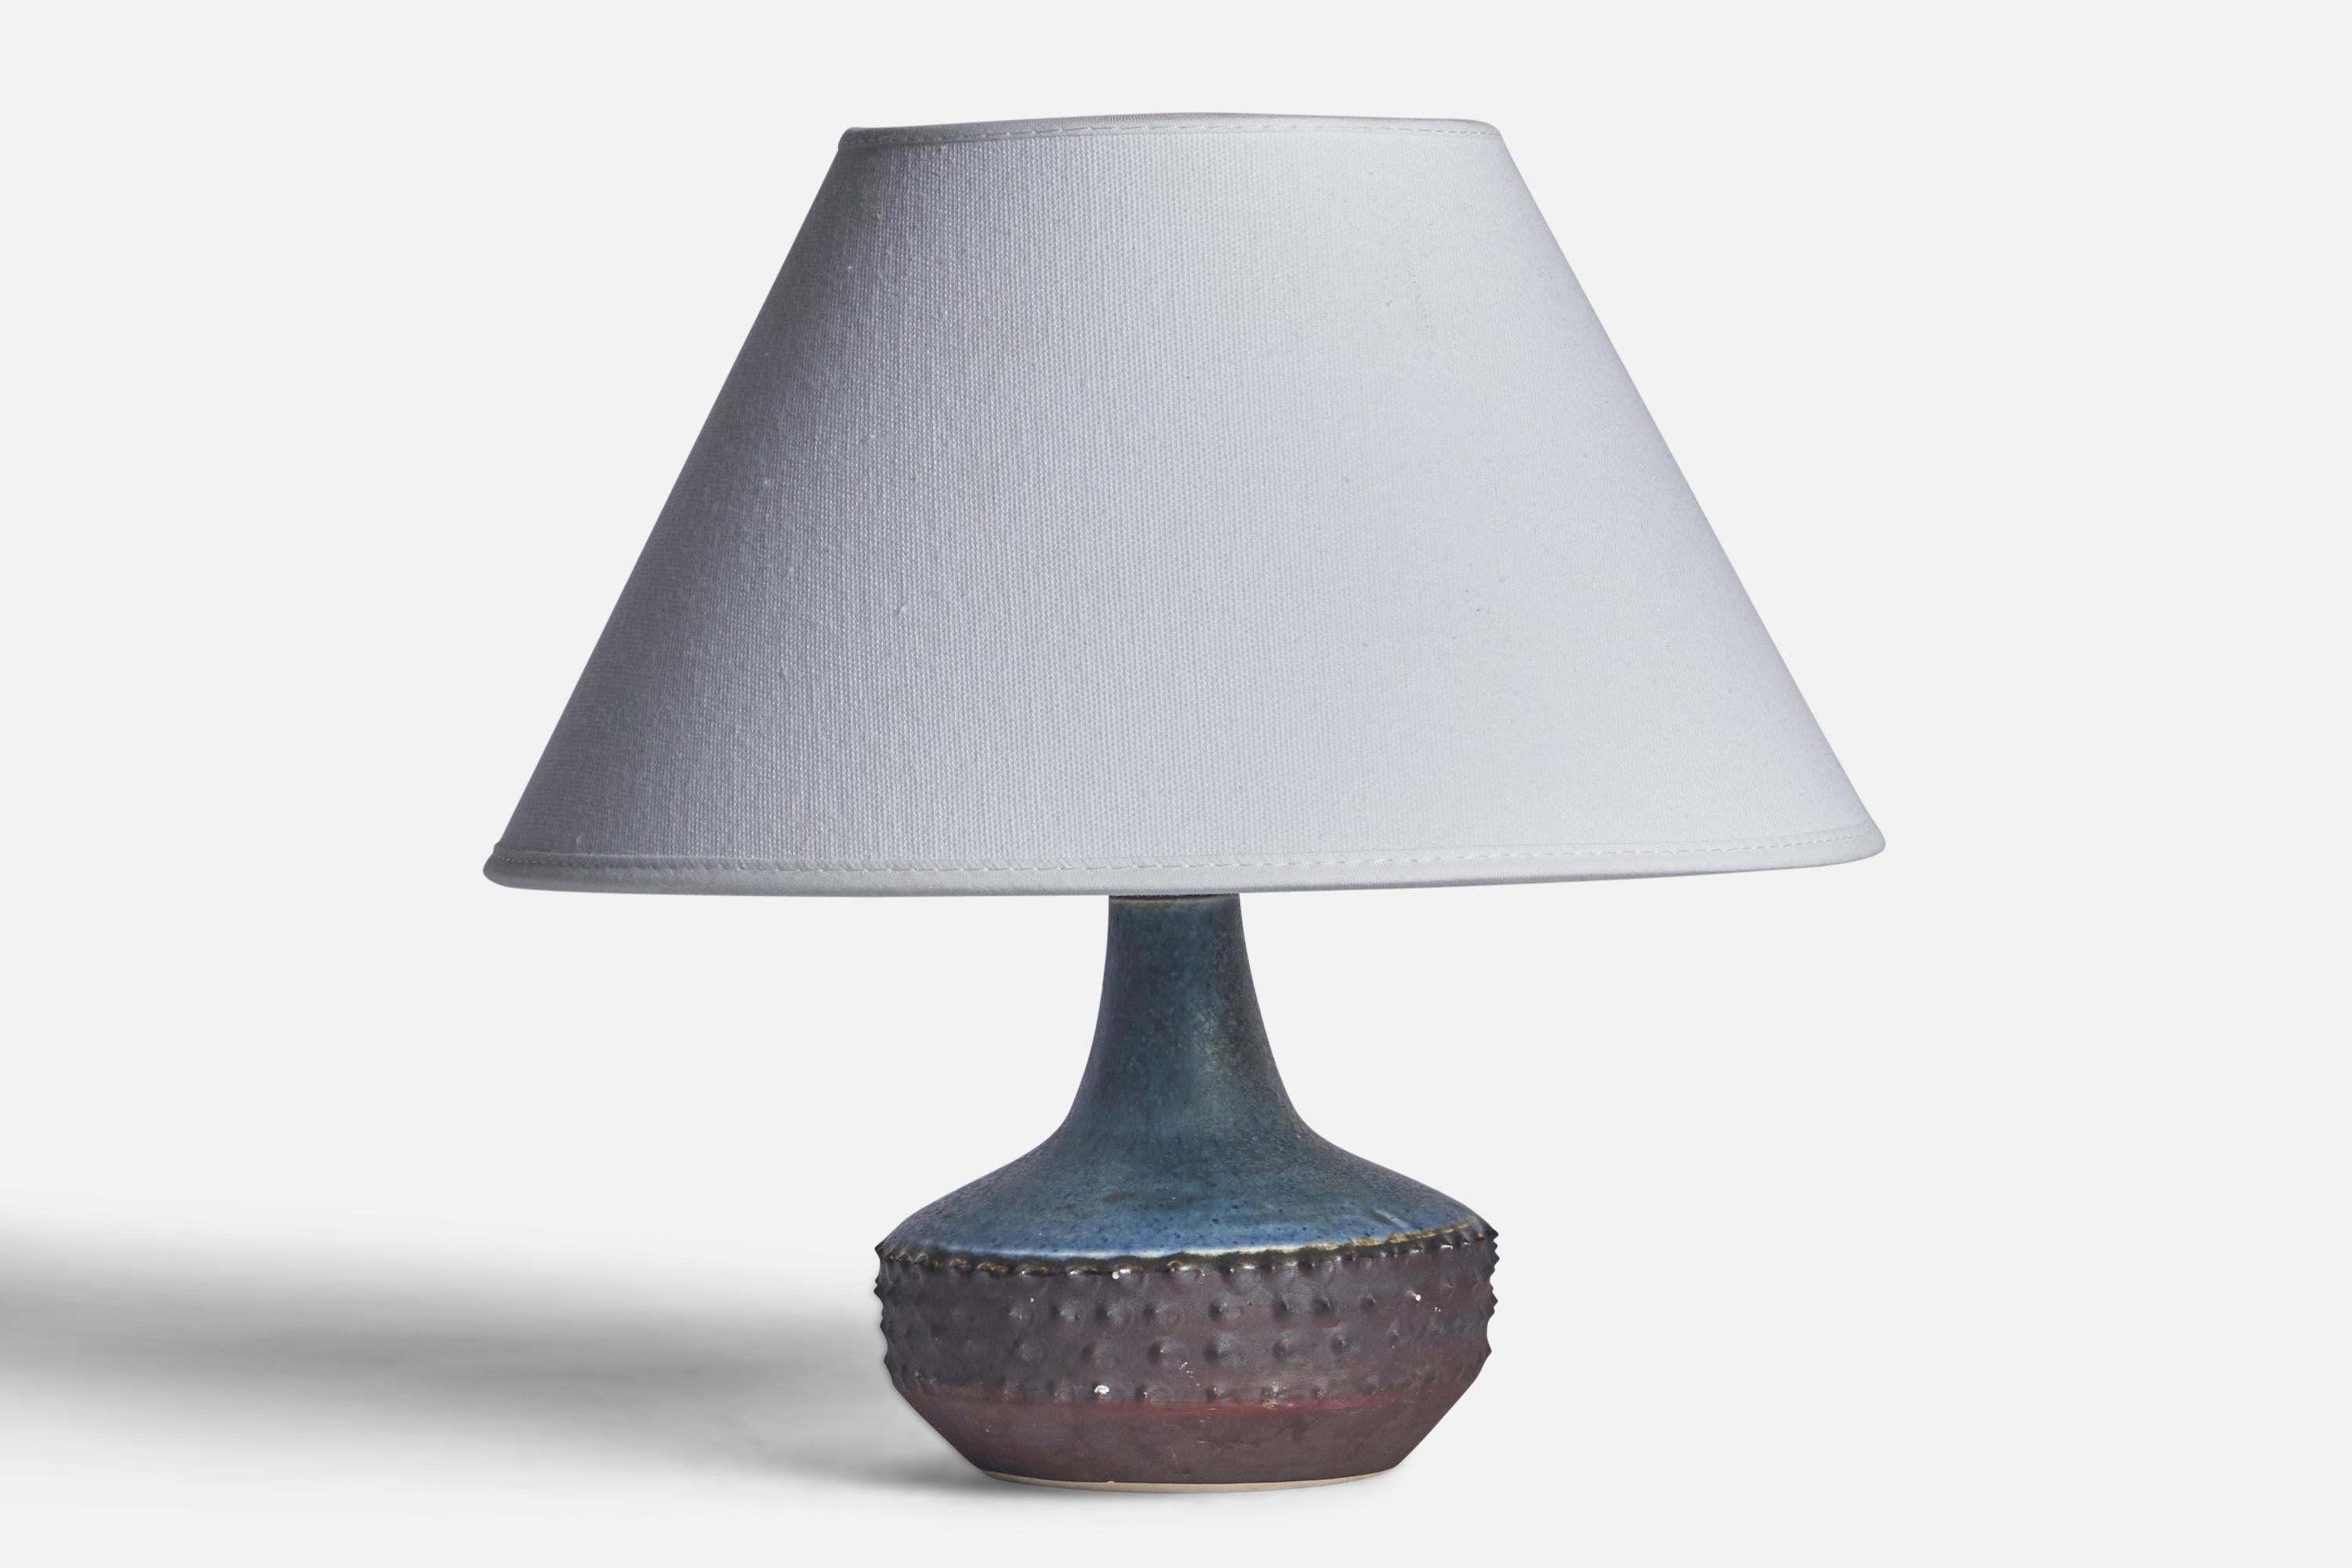 A small grey and blue-glazed stoneware table lamp designed and produced in Sweden, 1960s.

Dimensions of Lamp (inches): 6.65” H x 4.45” Diameter
Dimensions of Shade (inches): 7” Top Diameter x 10” Bottom Diameter x 5.5” H 
Dimensions of Lamp with